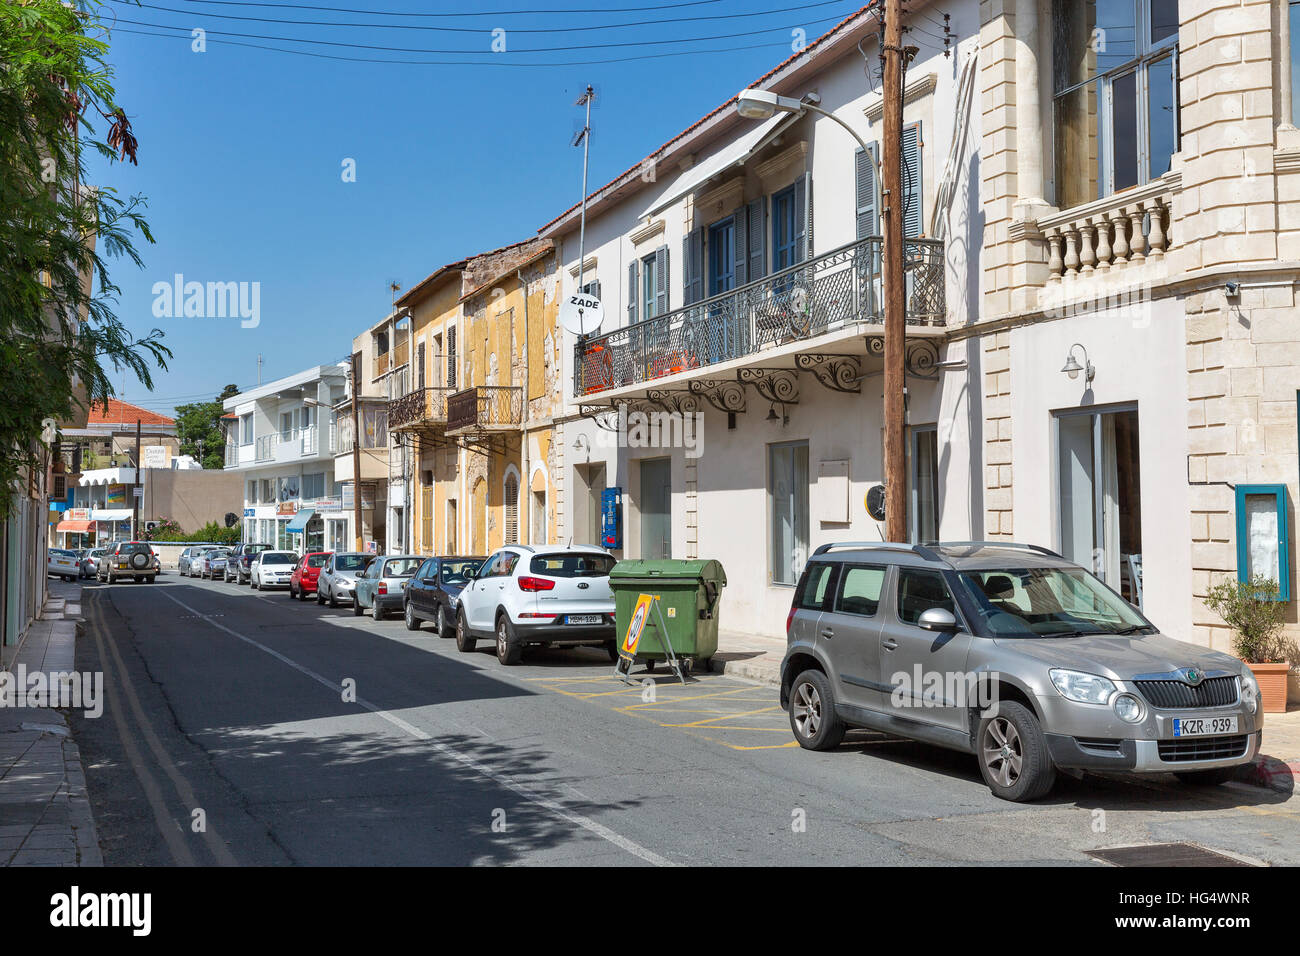 Cars parked on old narrow street with small houses. Paphos is a coastal popular summer tourist resort city in Cyprus. Stock Photo